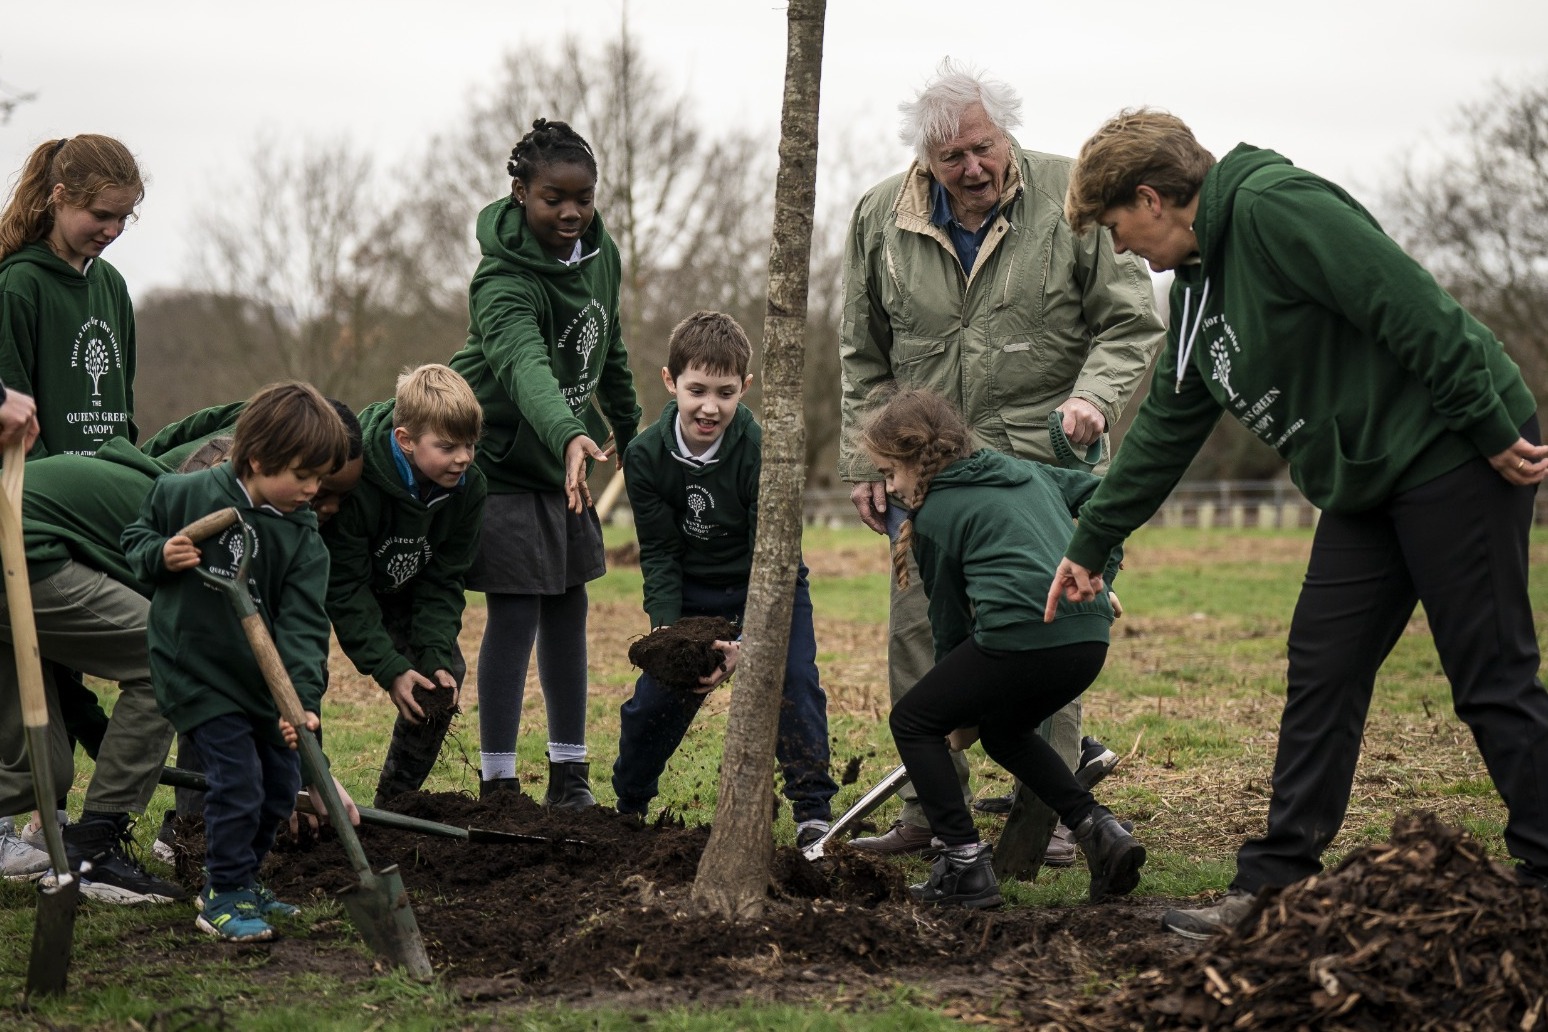 Sir David Attenborough plants tree to open woodland in honour of late Queen 